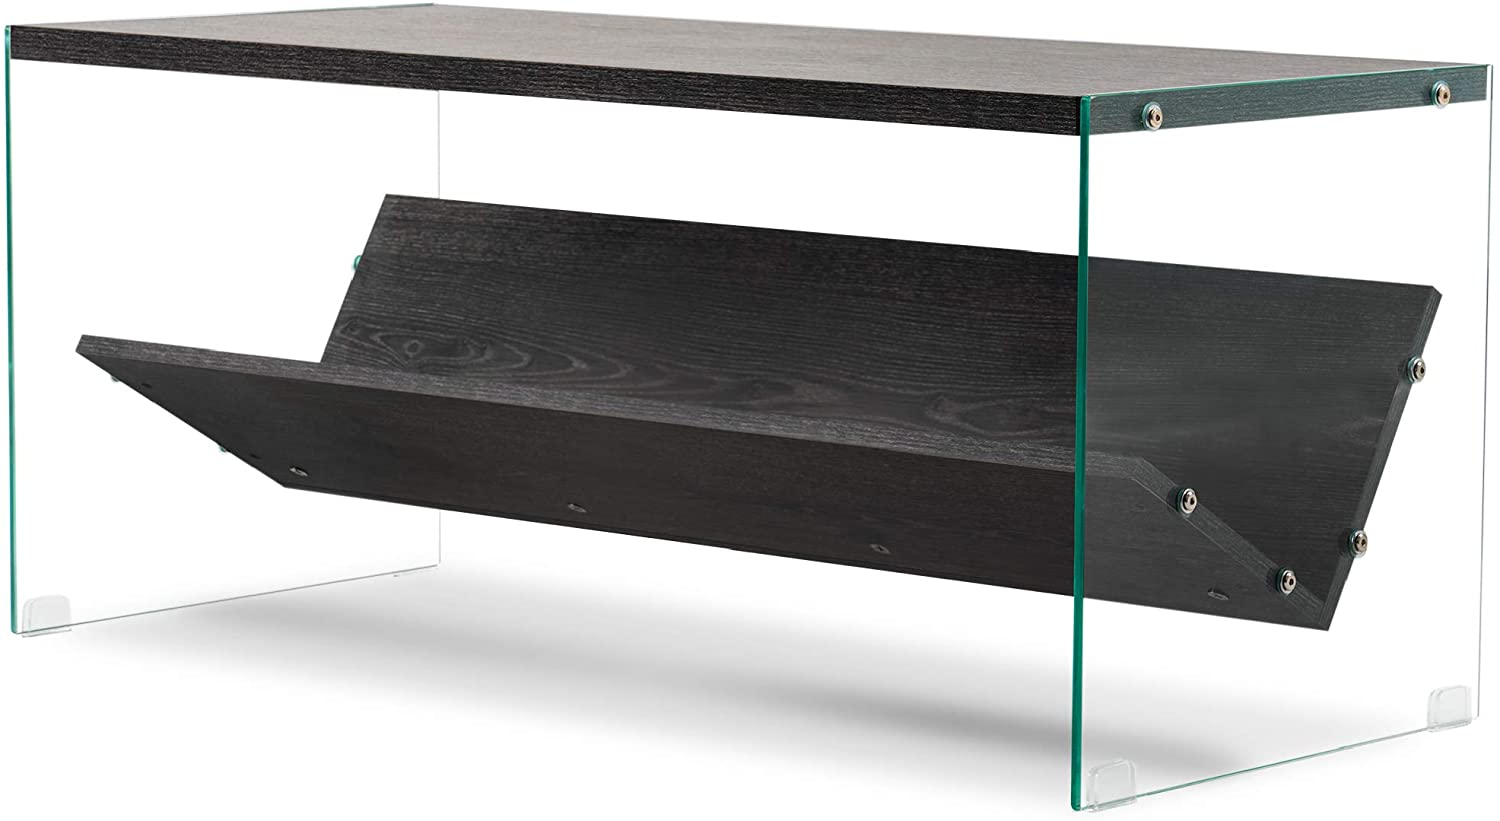 MCombo Coffee Table with Storage, Living Room Table Wooden Small Coffee Table Cocktail Table Center Tables for Living Room Small Space,6090-5771